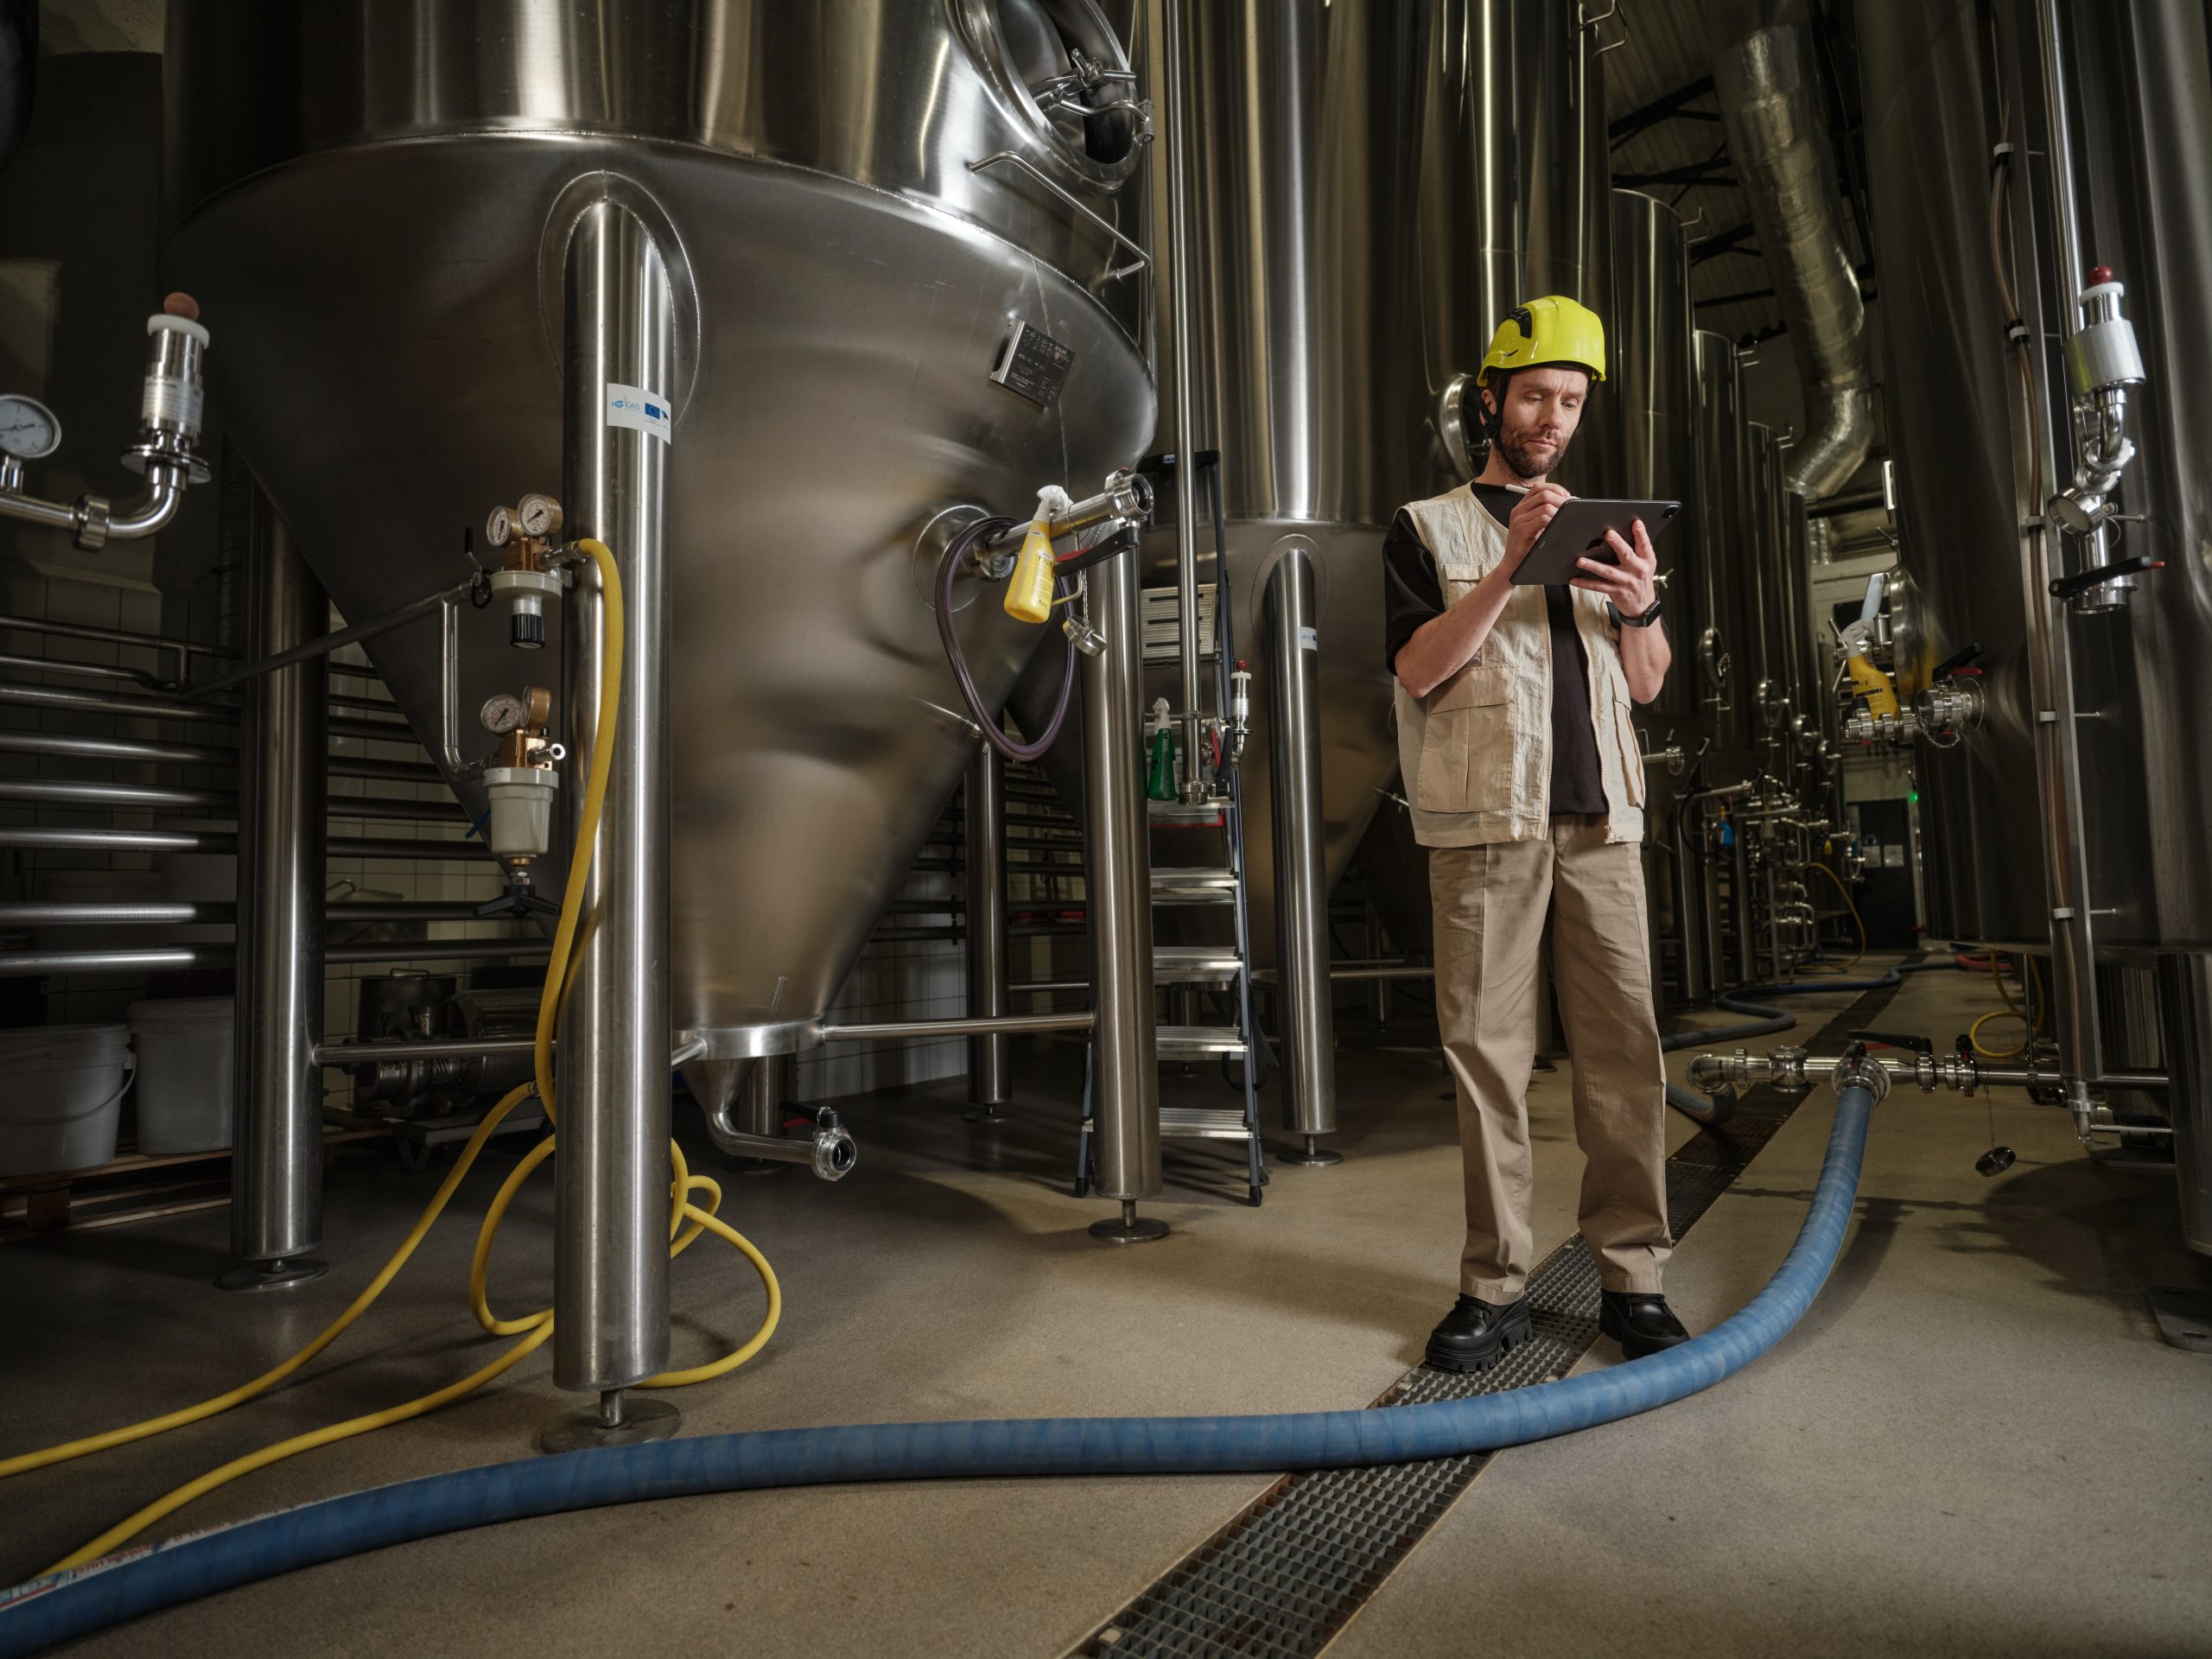 A worker standing in a brewery holding an ipad